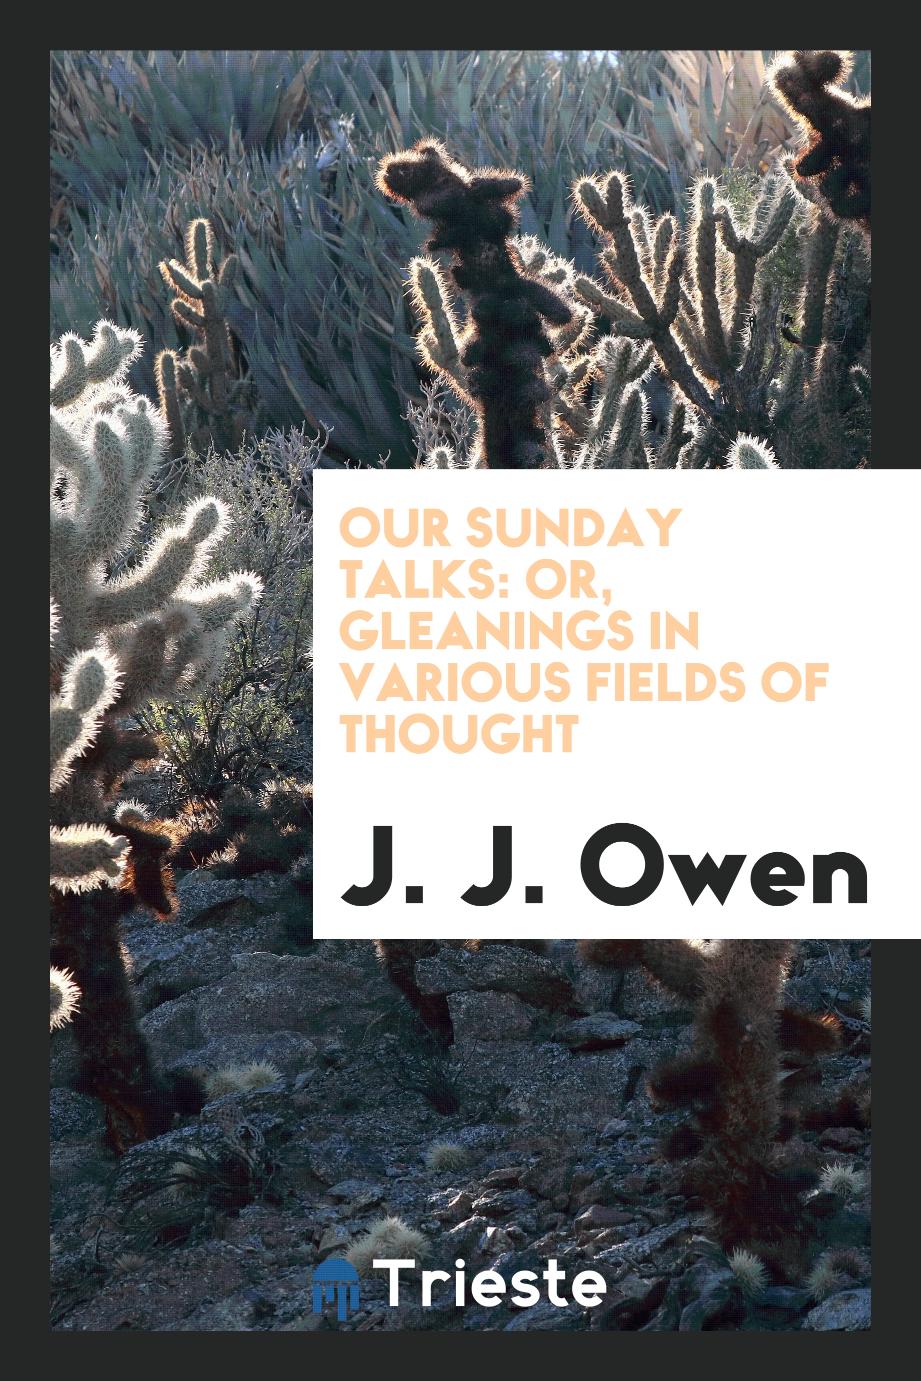 Our Sunday Talks: Or, Gleanings in Various Fields of Thought